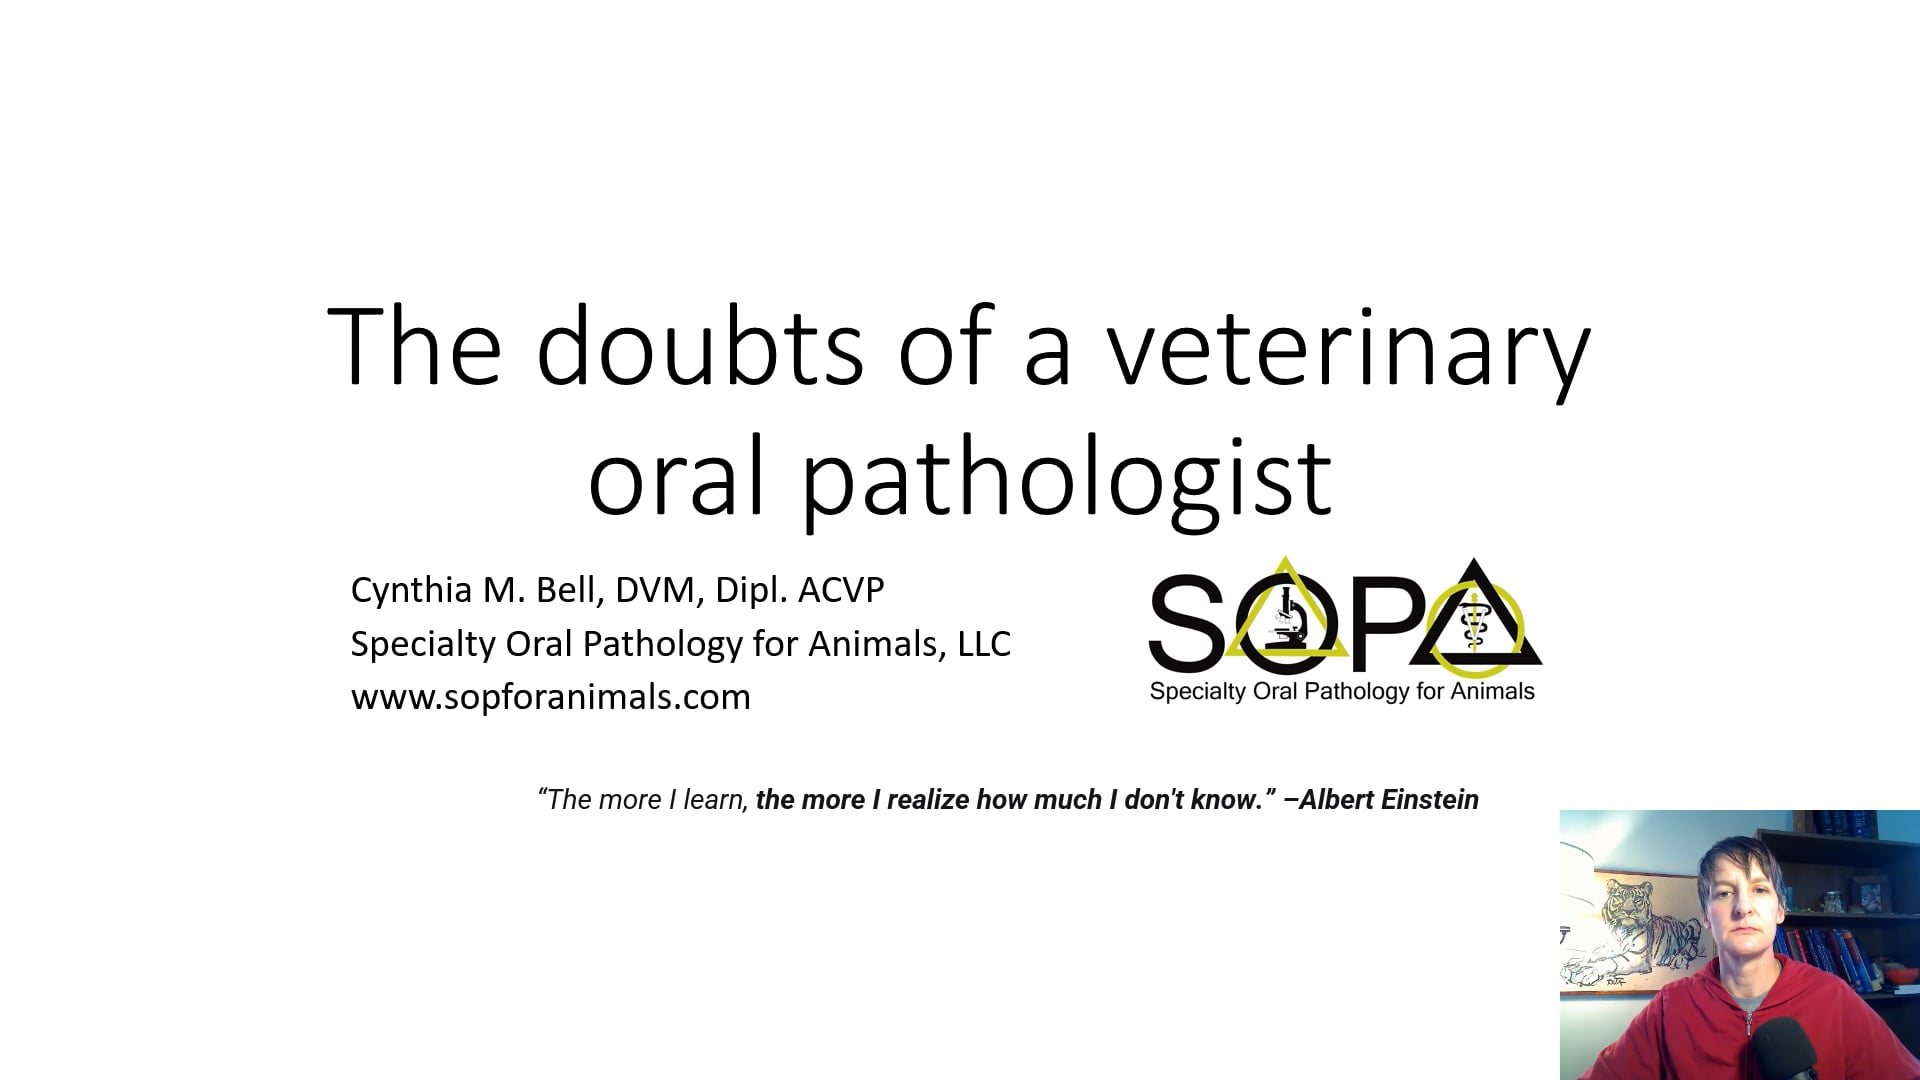 The doubts of an oral pathologist